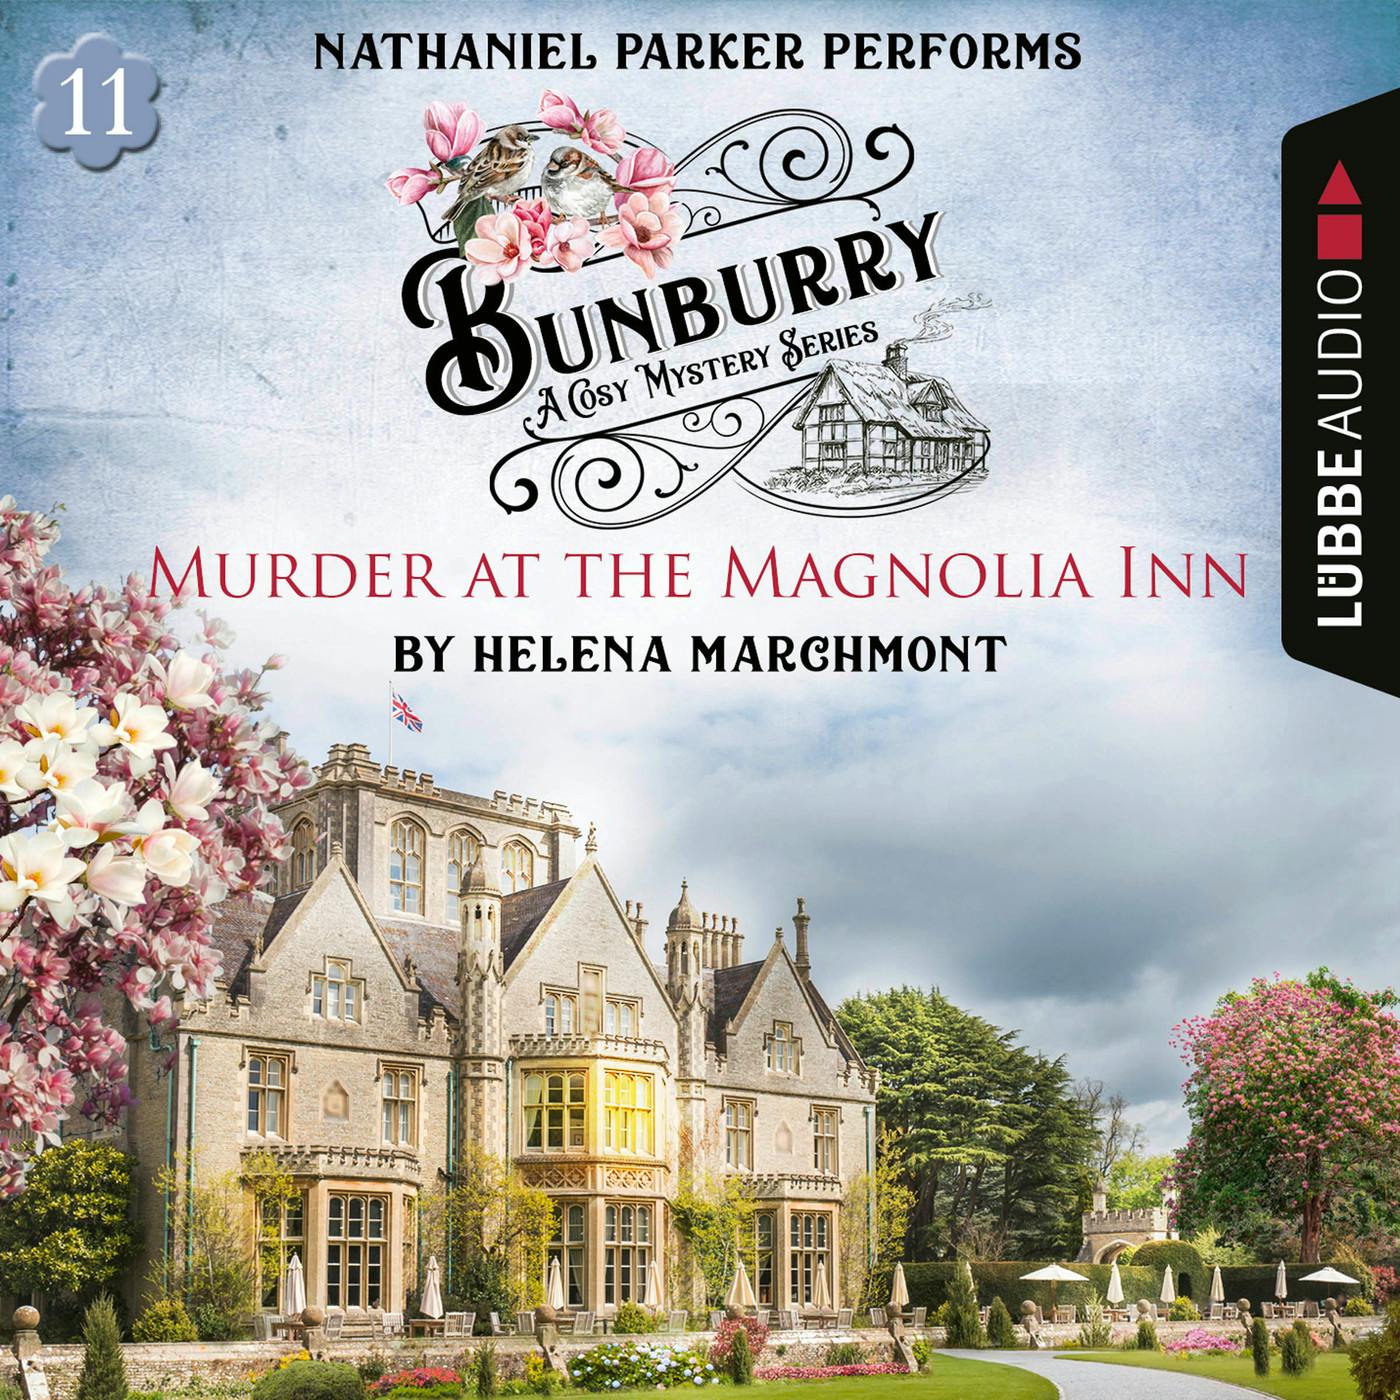 Murder at the Magnolia Inn - Bunburry - A Cosy Mystery Series, Episode 11 (Unabridged) - Helena Marchmont